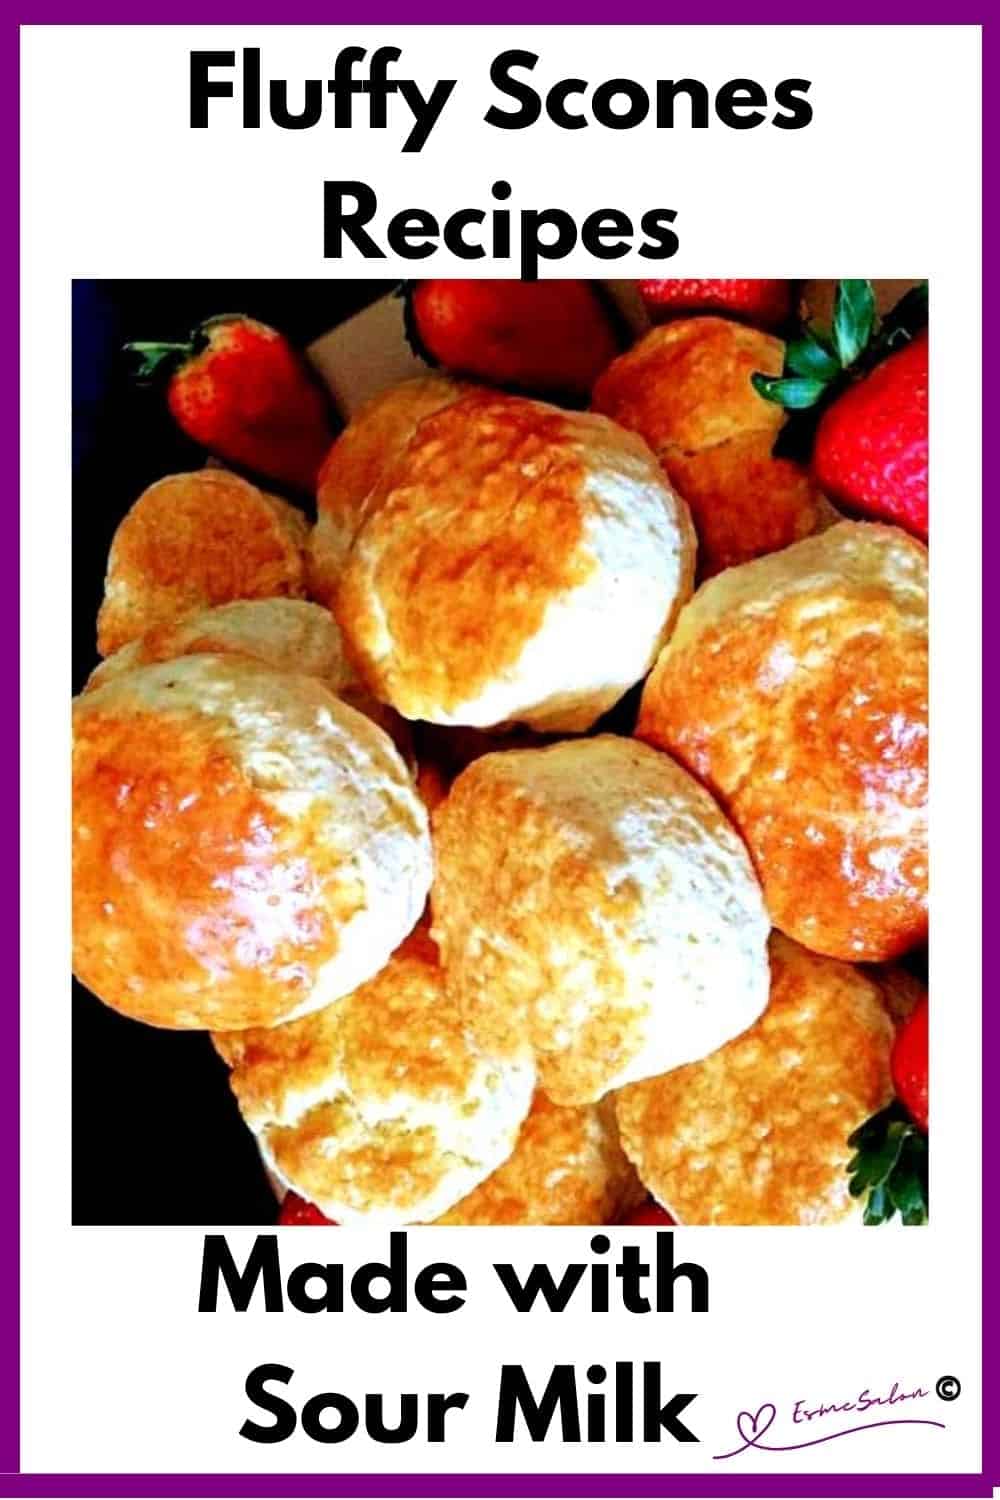 an image of sour milk scones placed on a glass tray with fresh strawberries on the side